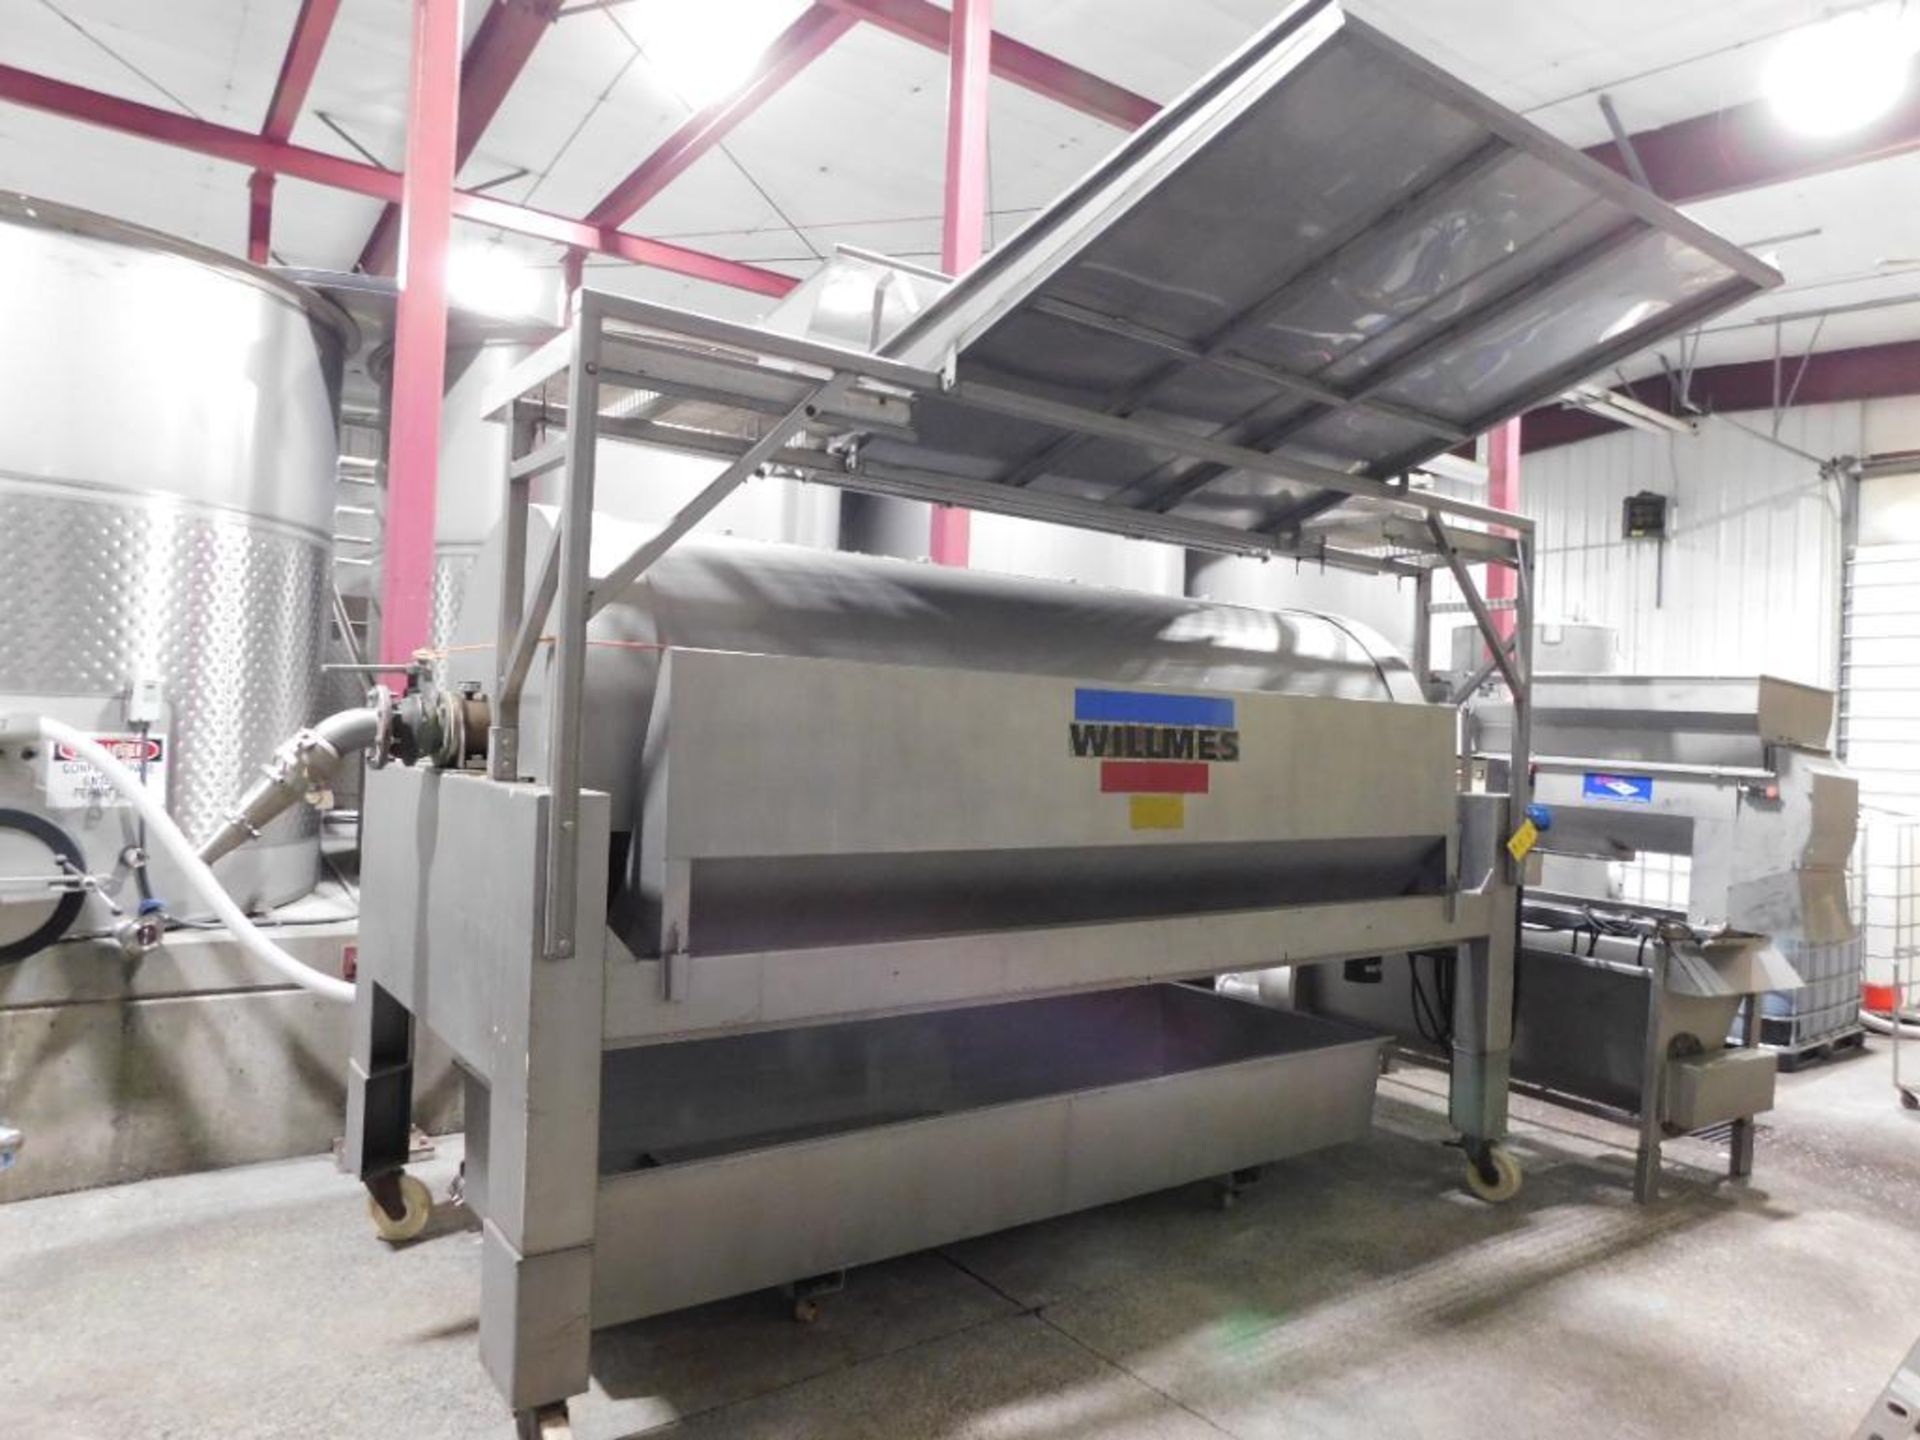 Willmes Merlin UP3000 3000 Liter Press, Full Automatic Control, Stainless Steel, Vertical Juice Drai